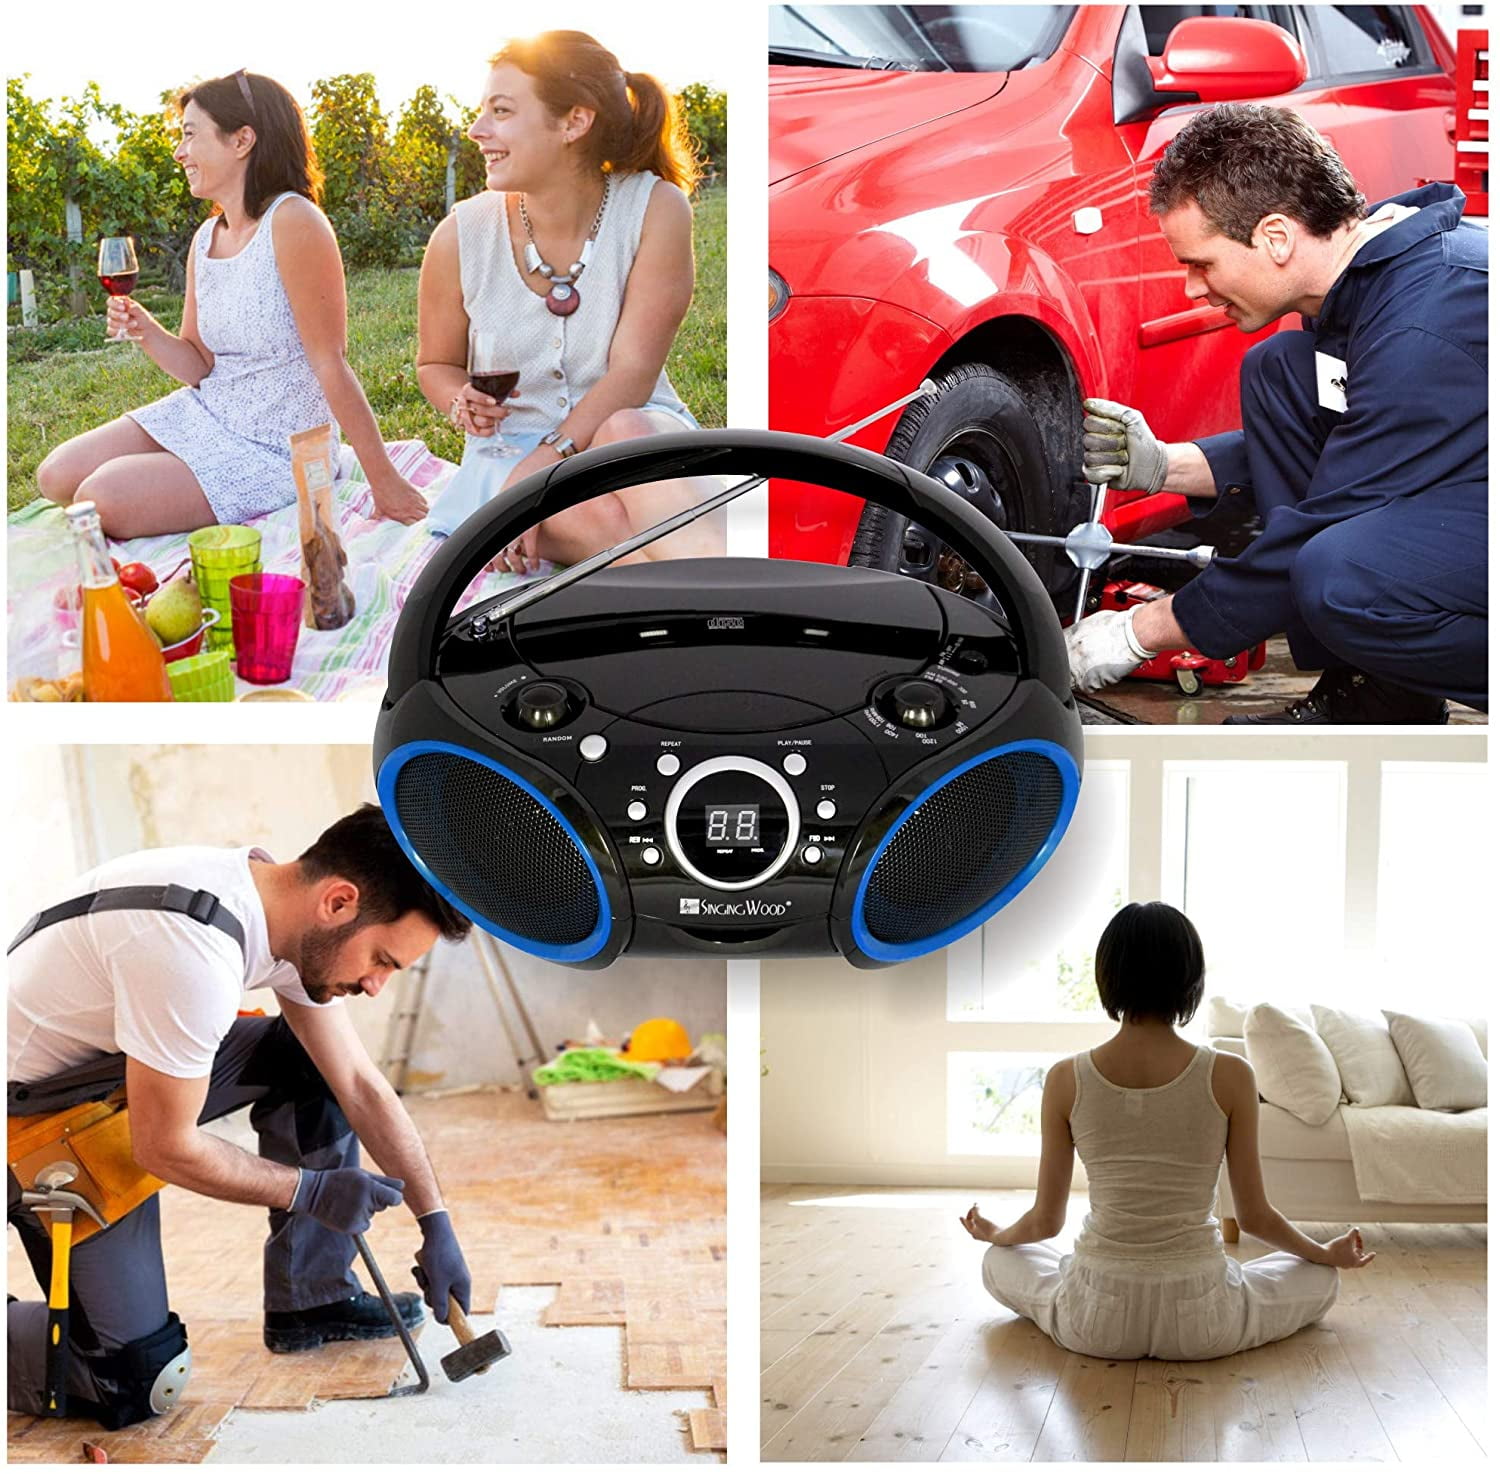 SINGING WOOD Portable CD Player AM FM Radio with Aux Line in Foldable Carrying Handle Black with a Touch of Blue Rims Headphone Jack 